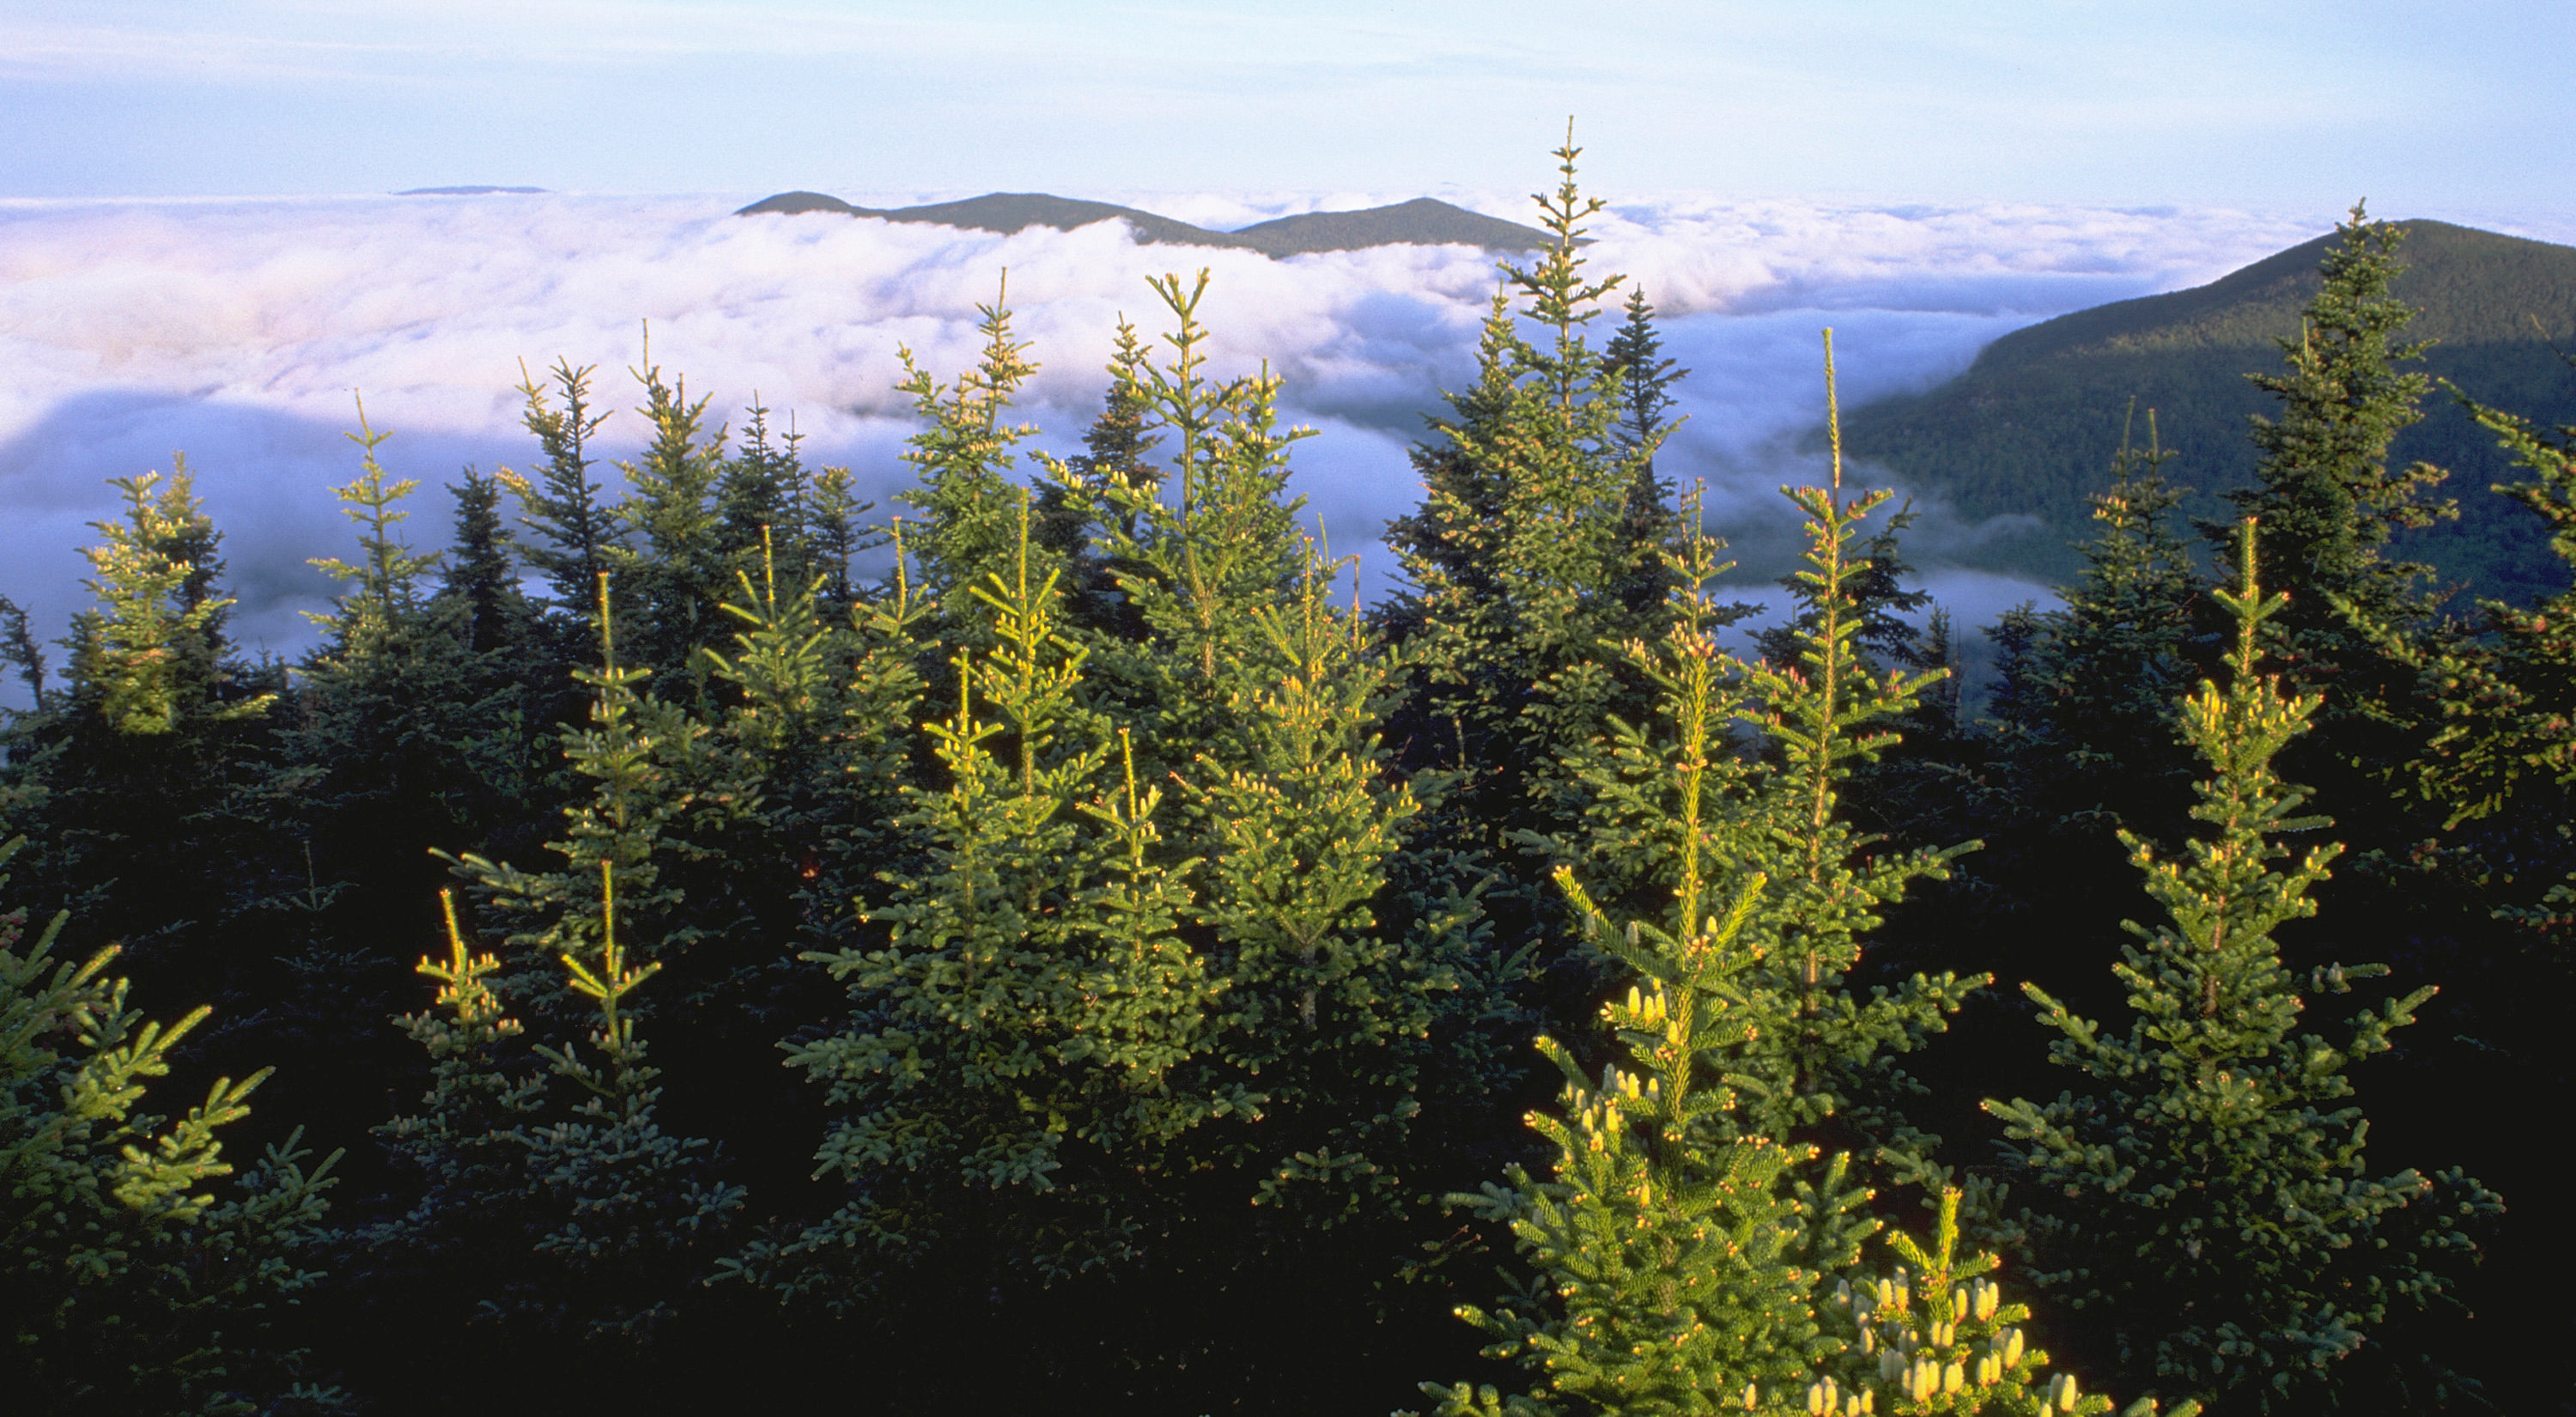 Elevated view of evergreen forest in mountain setting with cloudy sky in background.